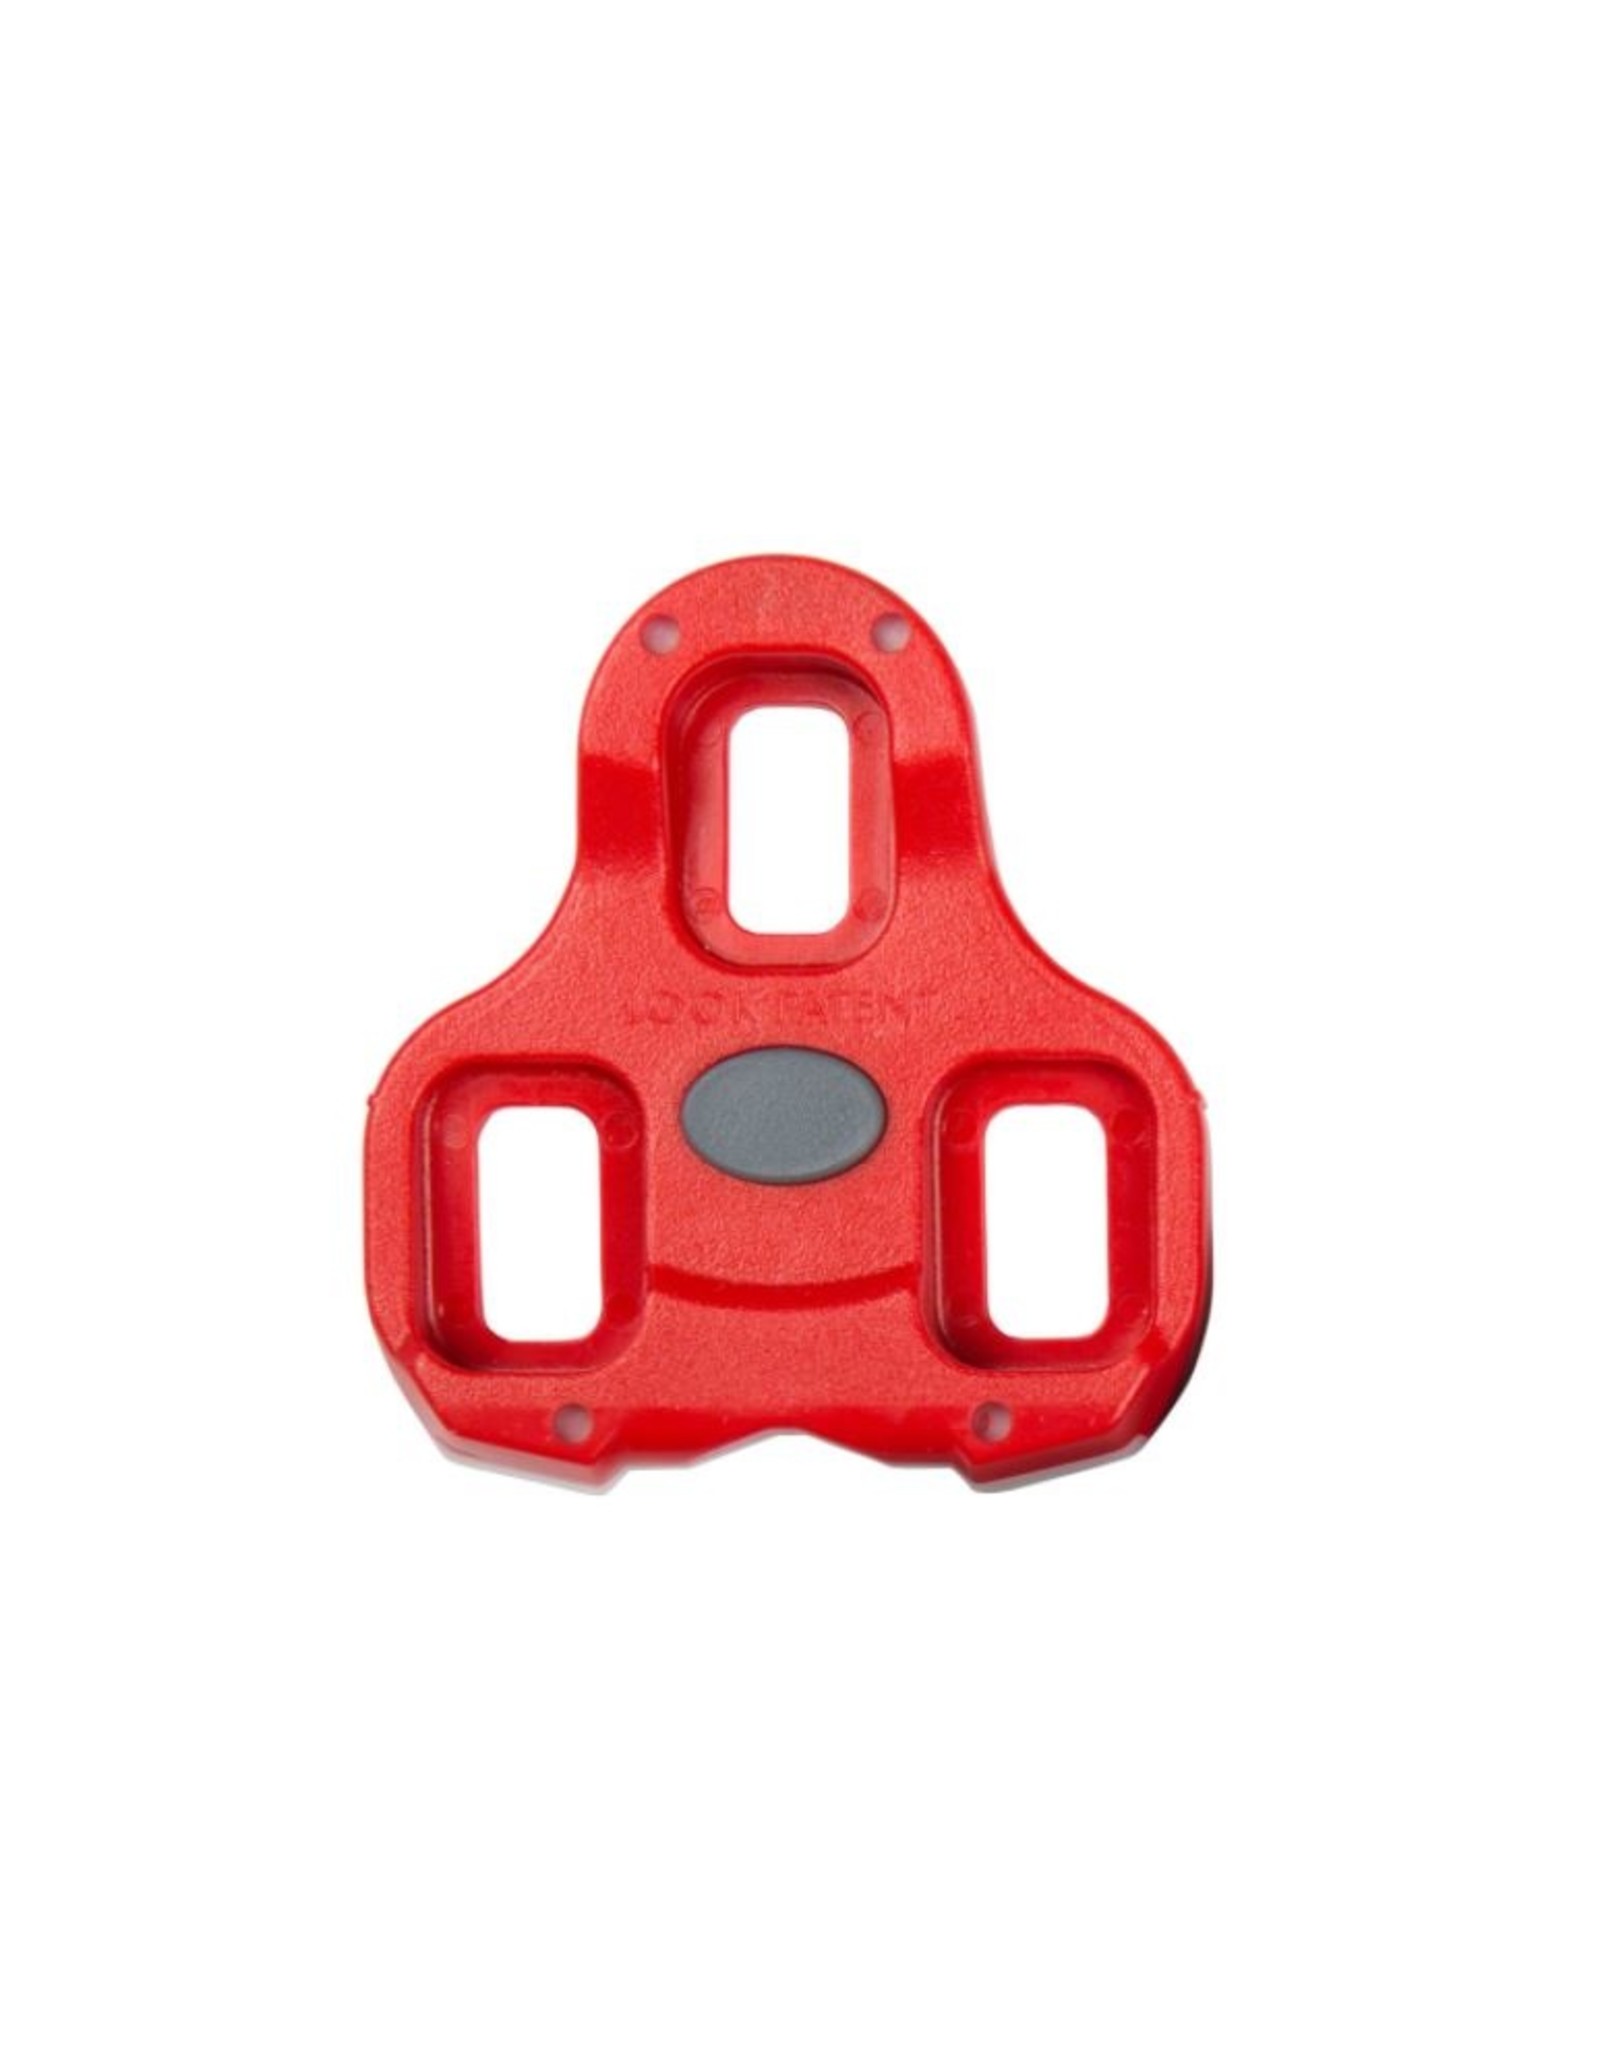 Look Keo Cleats - Red, 9 degrees - Roscoe Bikes Online